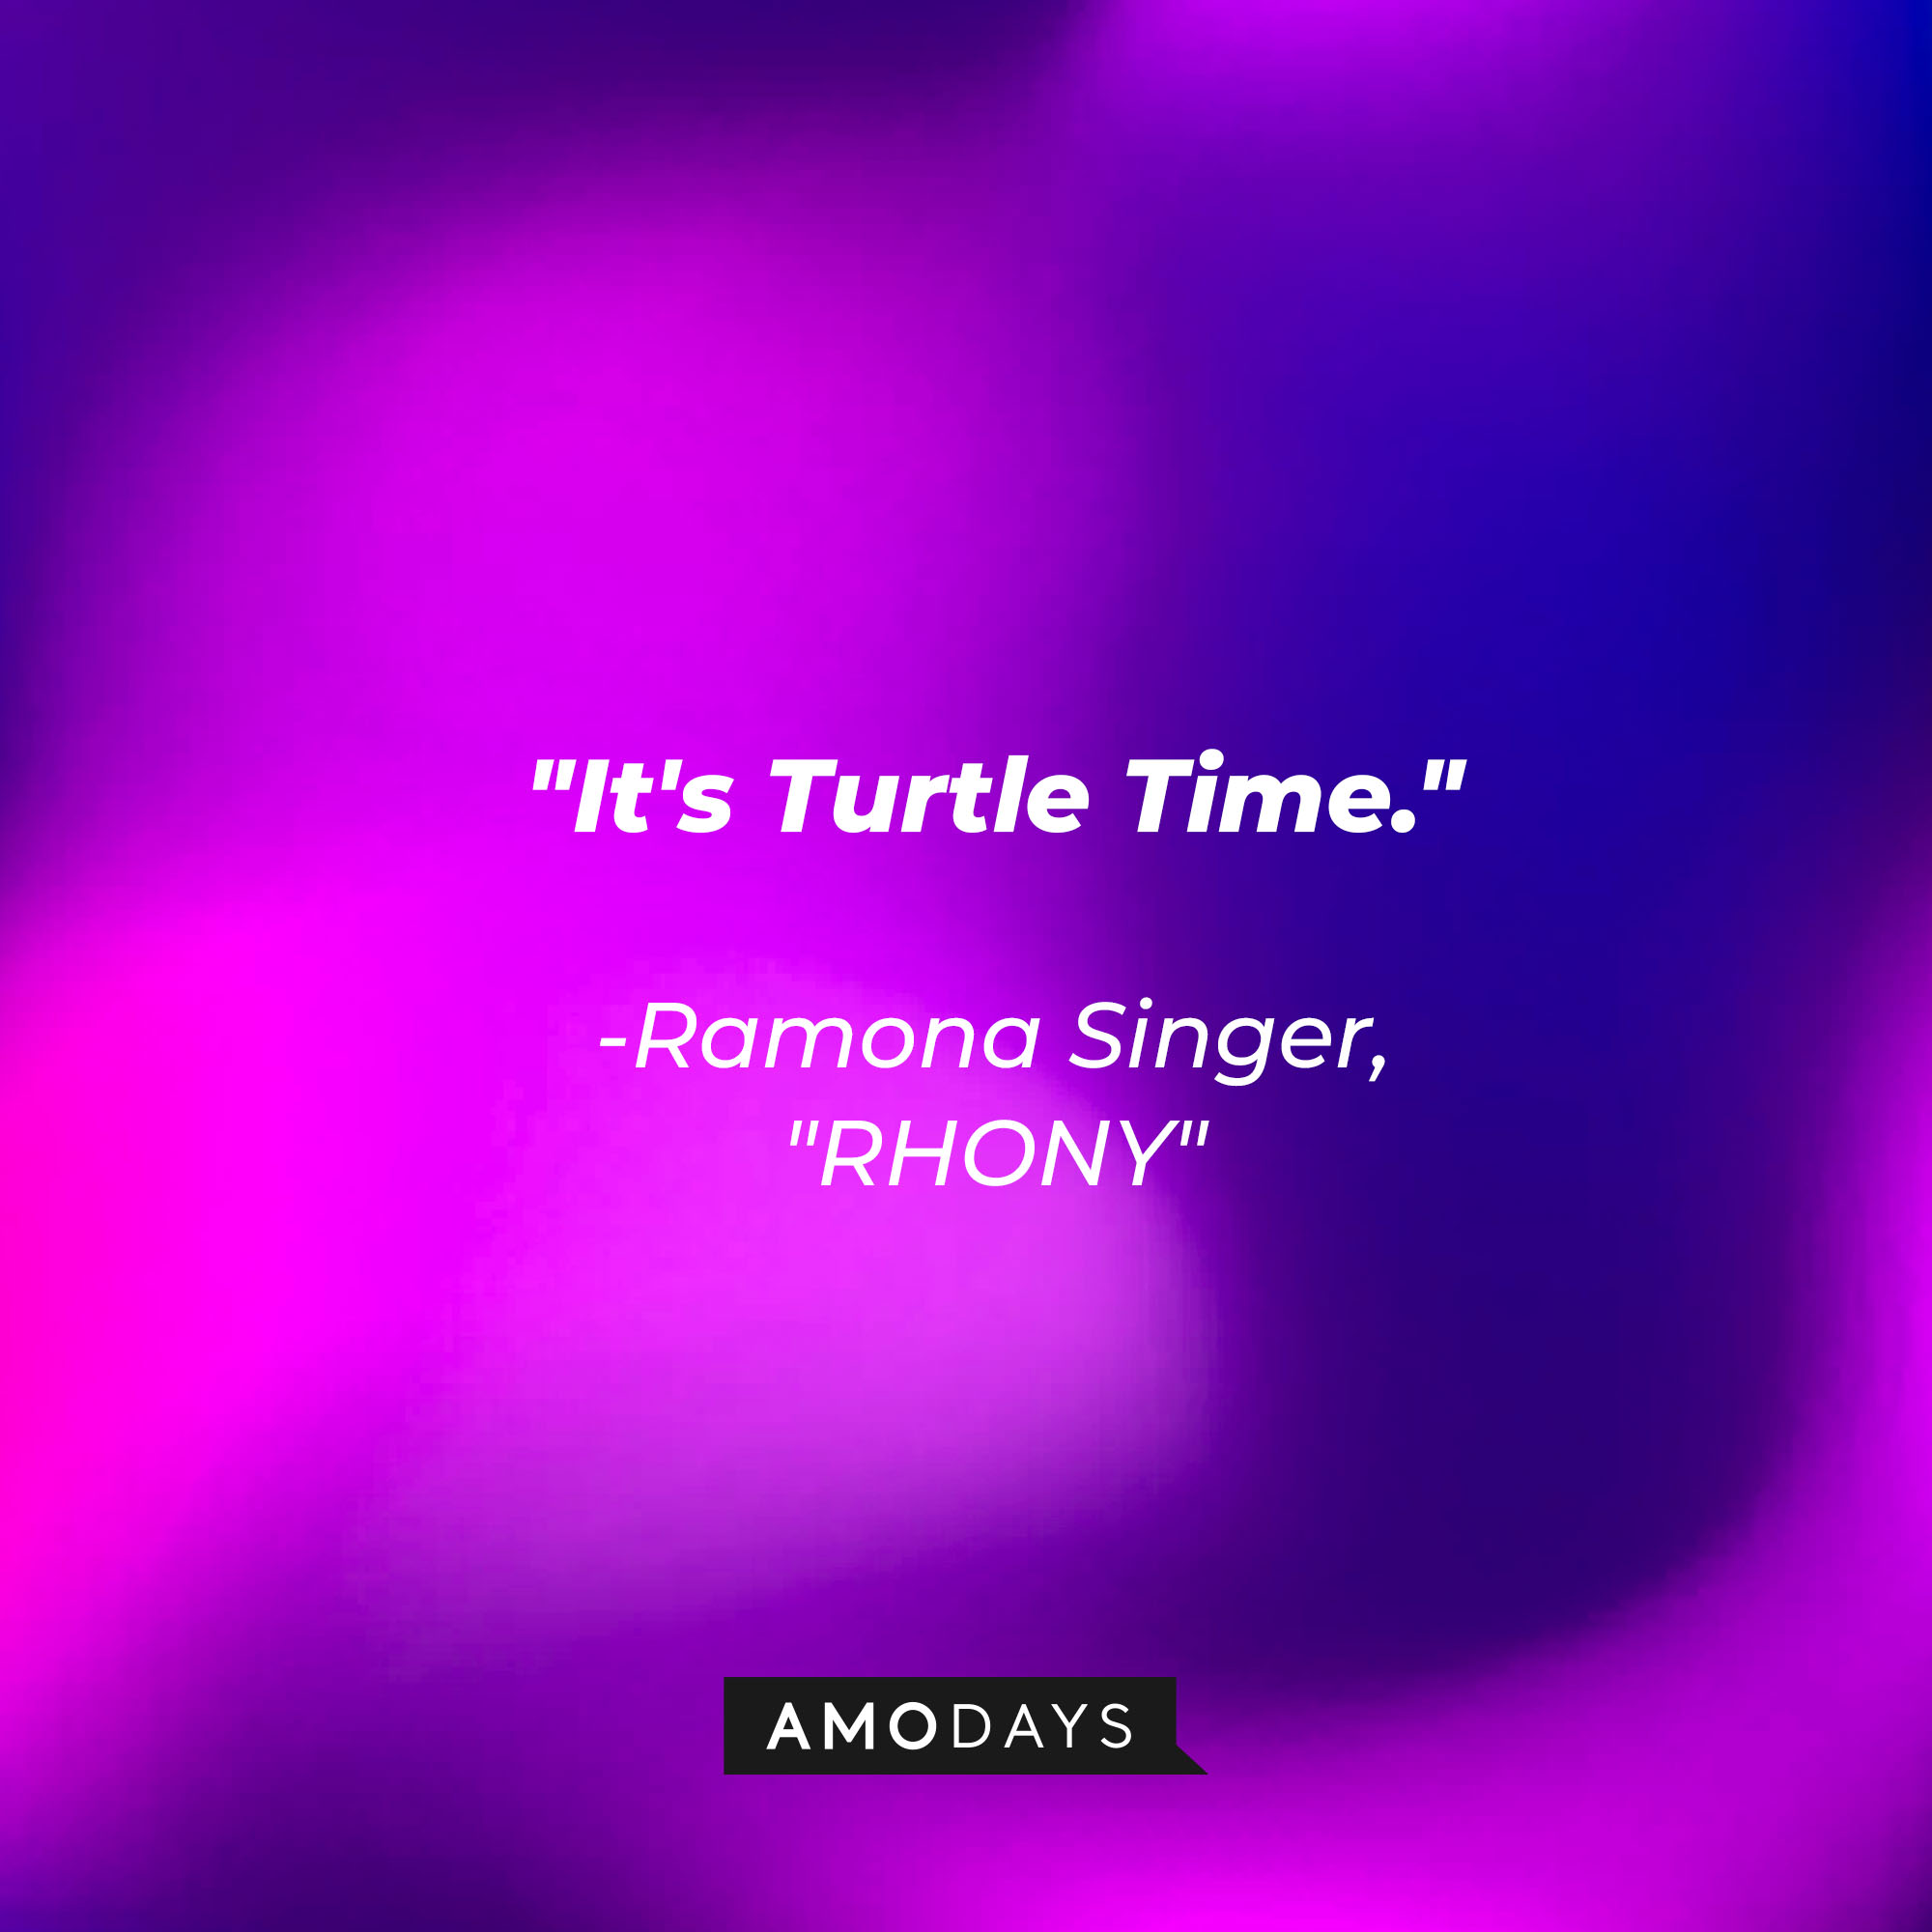 Ramona Singer's quote: "It's Turtle Time" | Source: Amodays